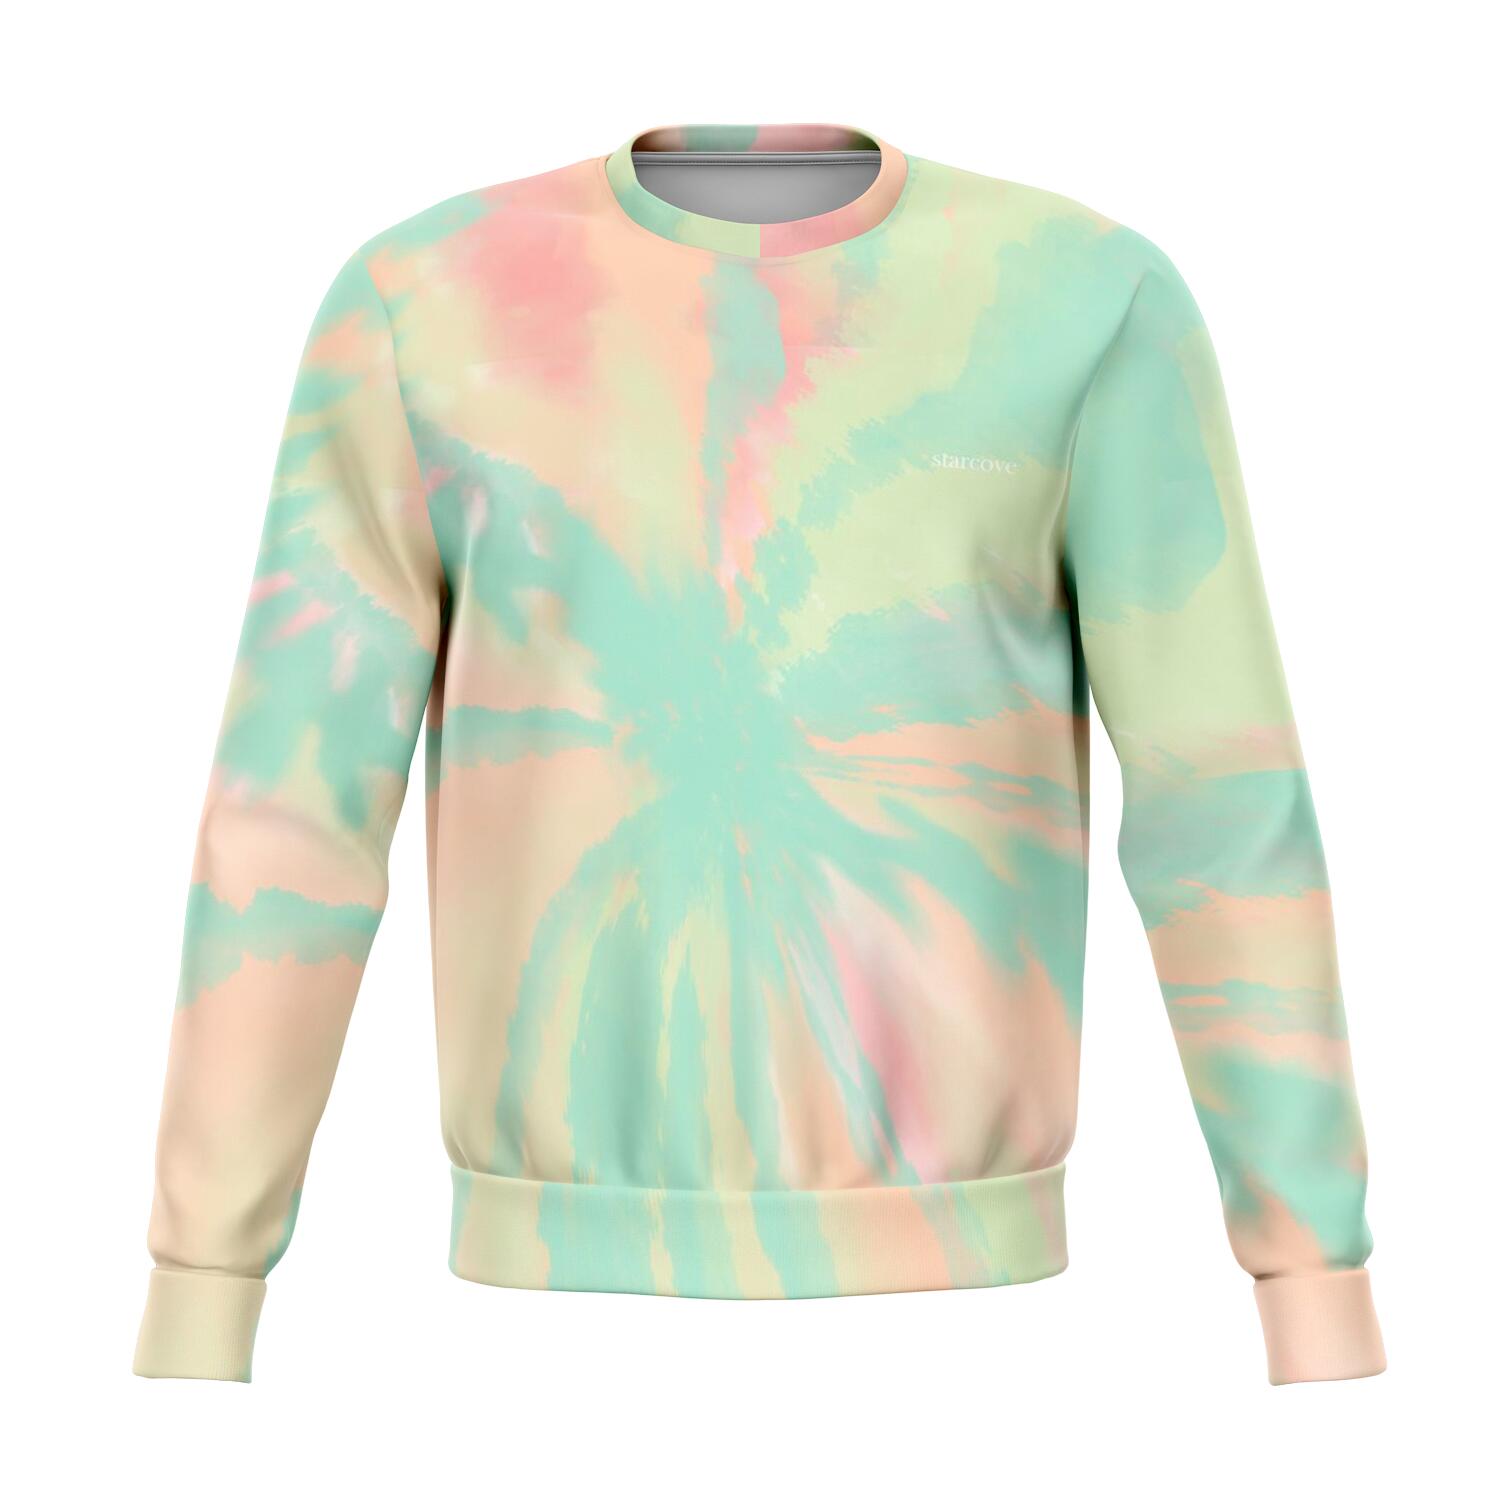 Pastel Tie Dye Sweatshirt, Crewneck Graphic Green Pink Blue Long Sleeve Sweater Jumper Pullover Top Kawaii Goth Cotton Clothing Plus Size Starcove Fashion